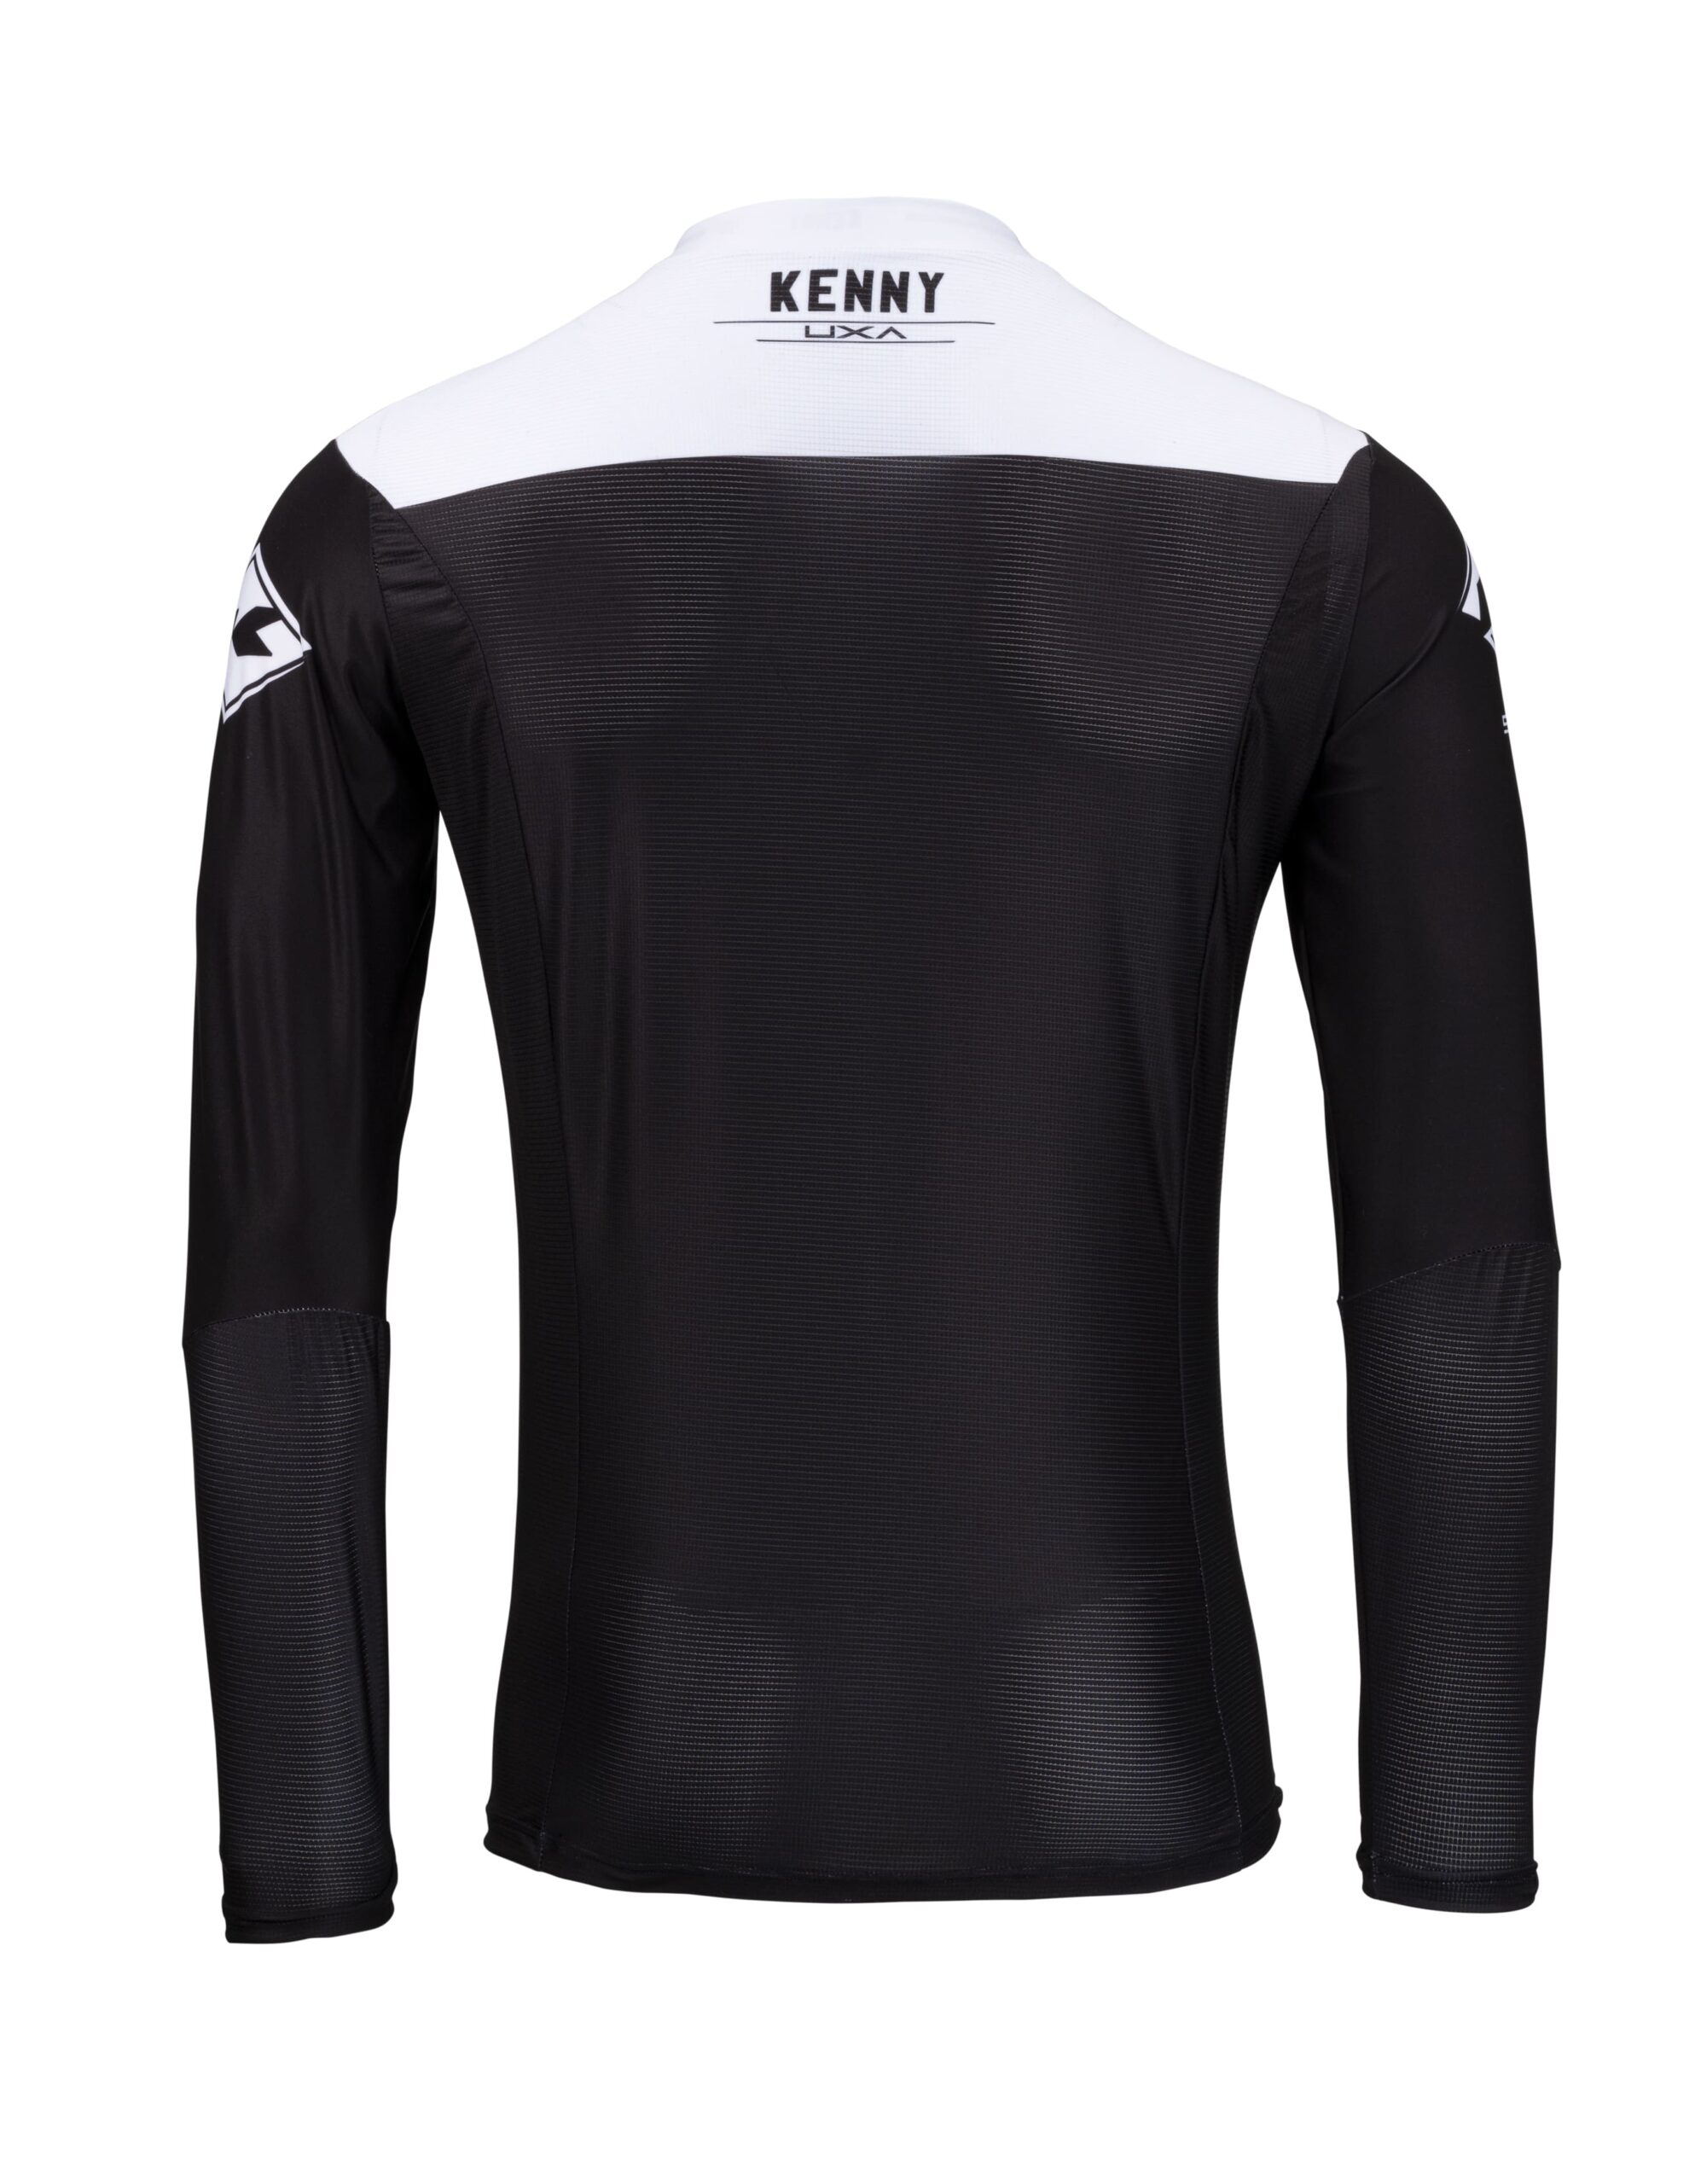 maillot_motocross_kenny_performance_red_foil